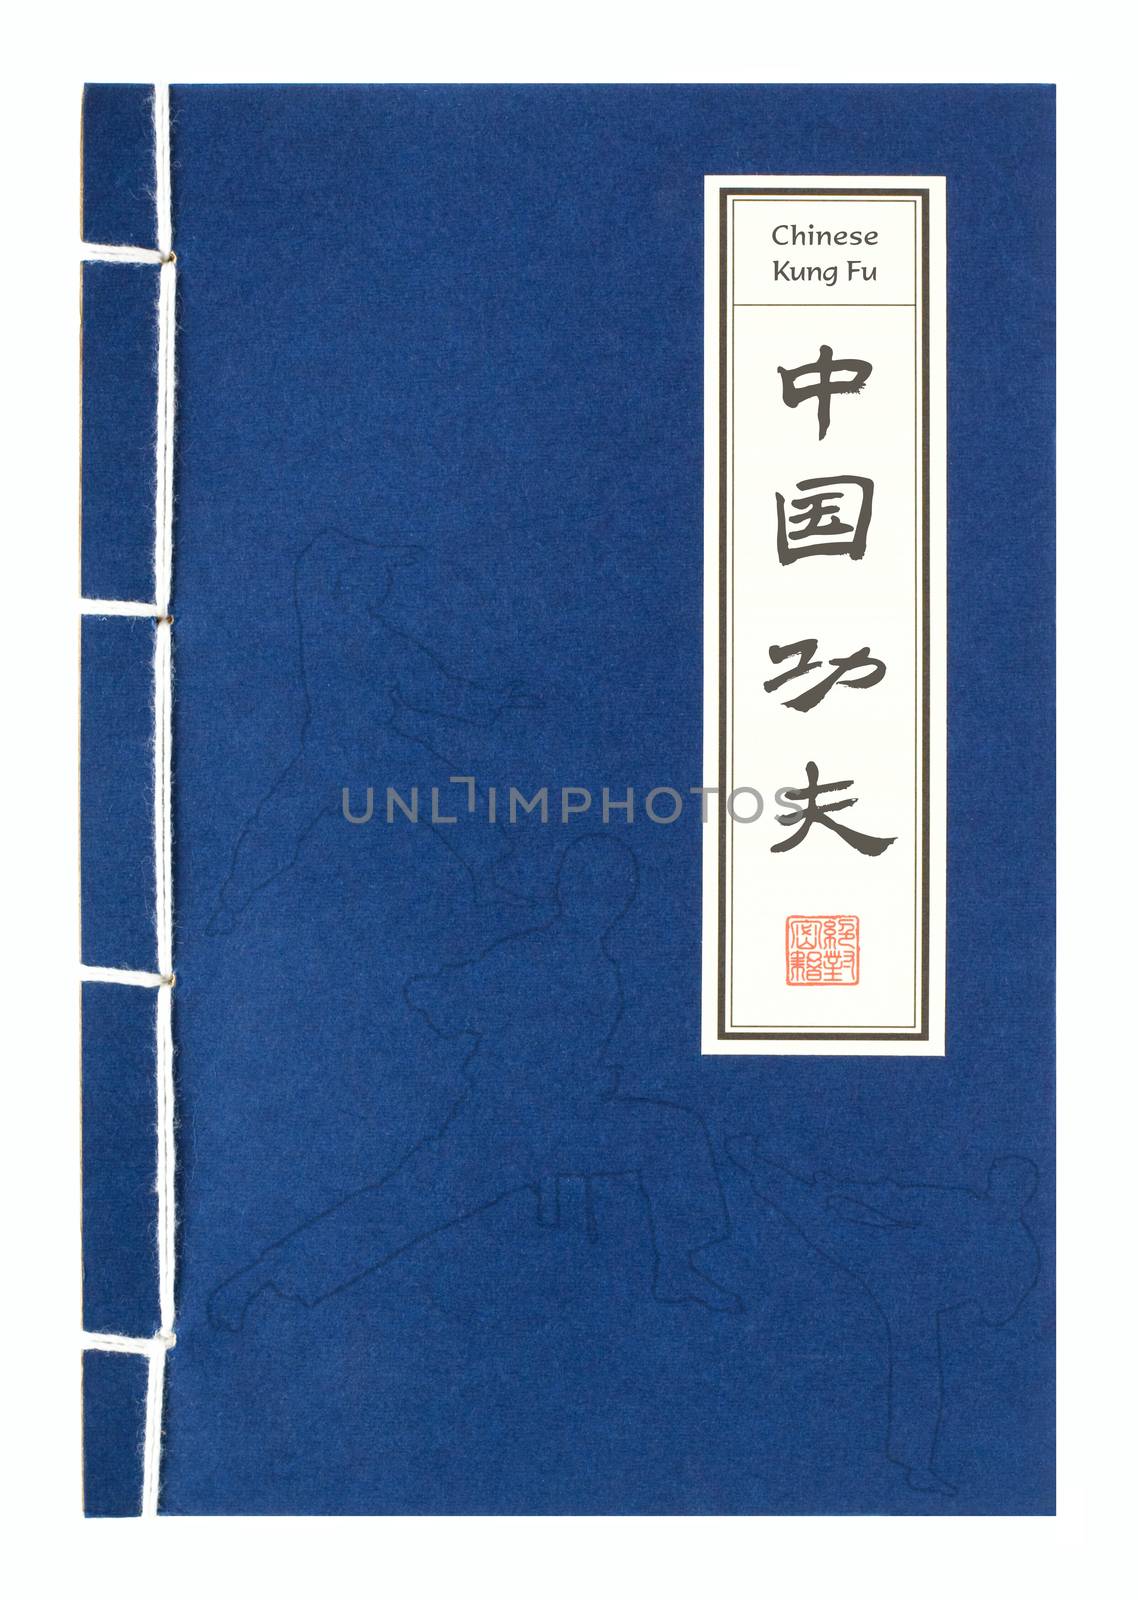 Chinese Kung Fu book blue cover